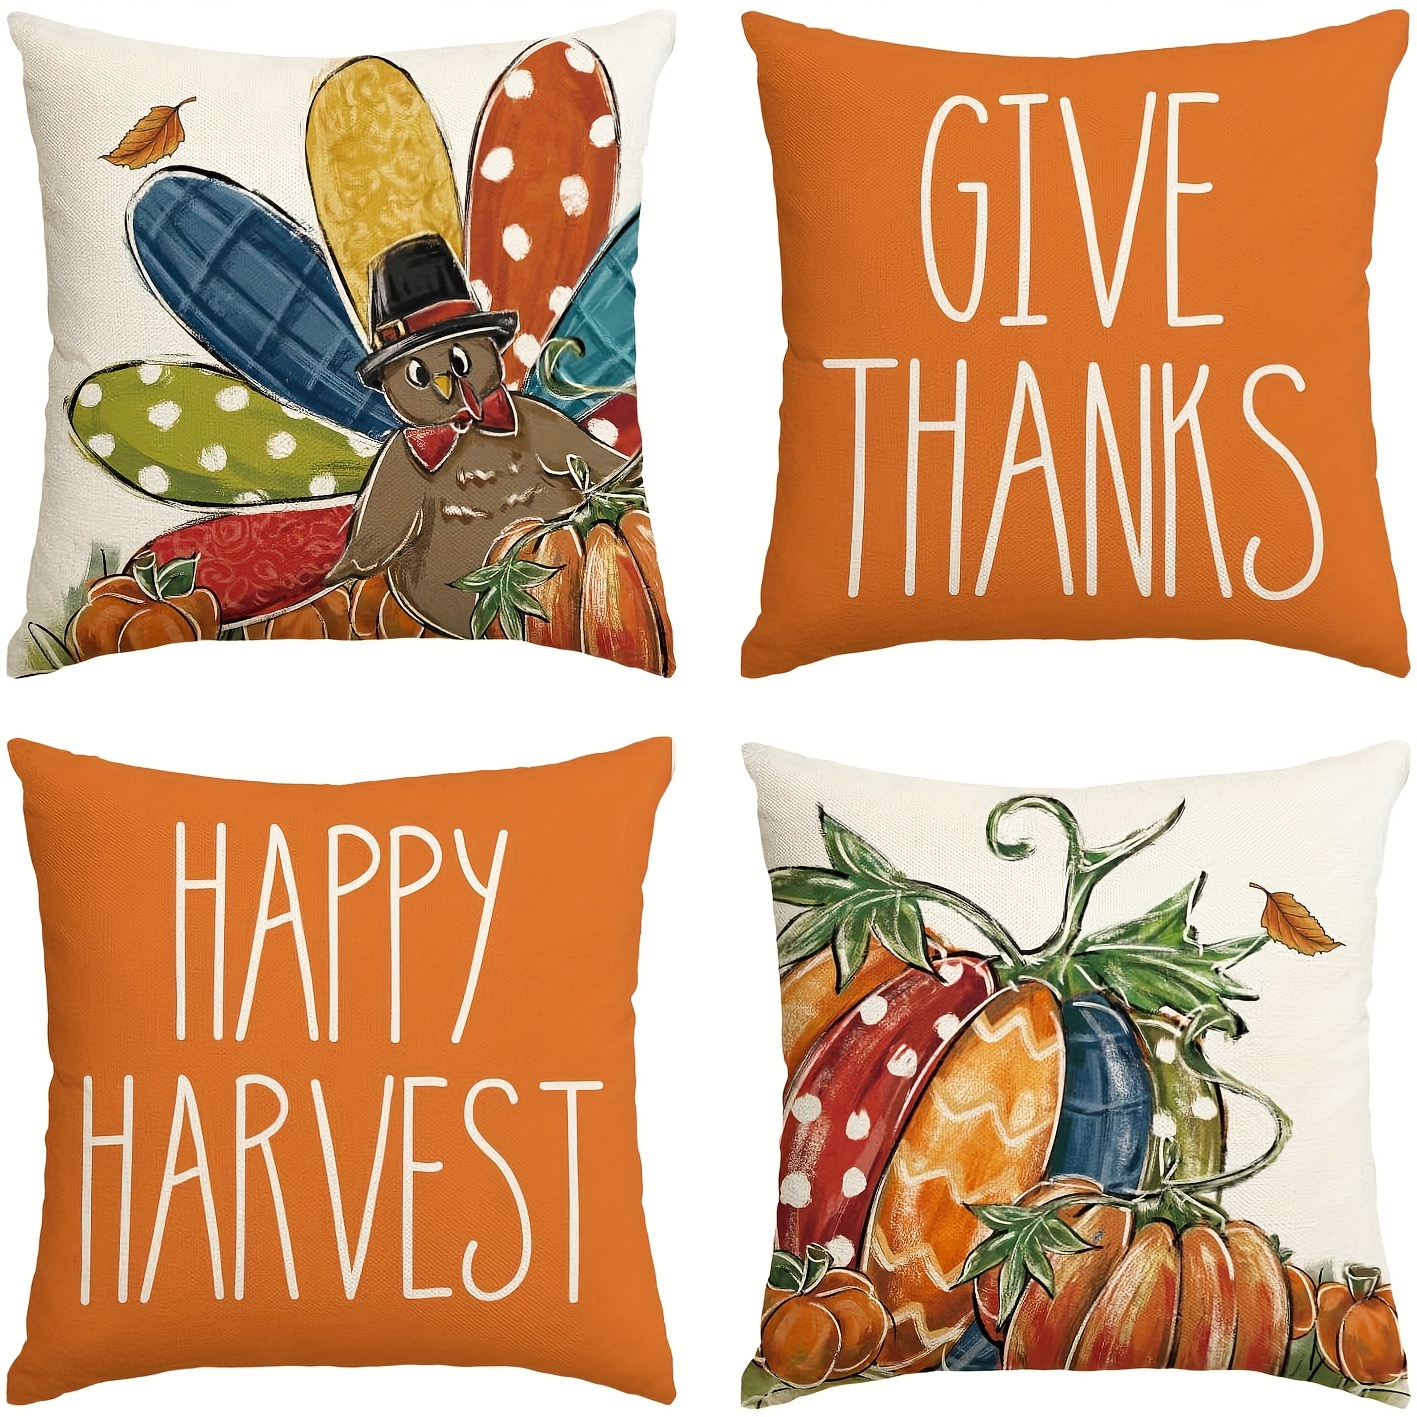 

4-pack Thanksgiving Throw Pillow Covers 18x18 Inch, Contemporary Zippered Polyester Pillowcases For Home Decor, Featuring Thanksgiving Turkey, Pumpkin Designs & "give Thanks", "happy Harvest" Messages